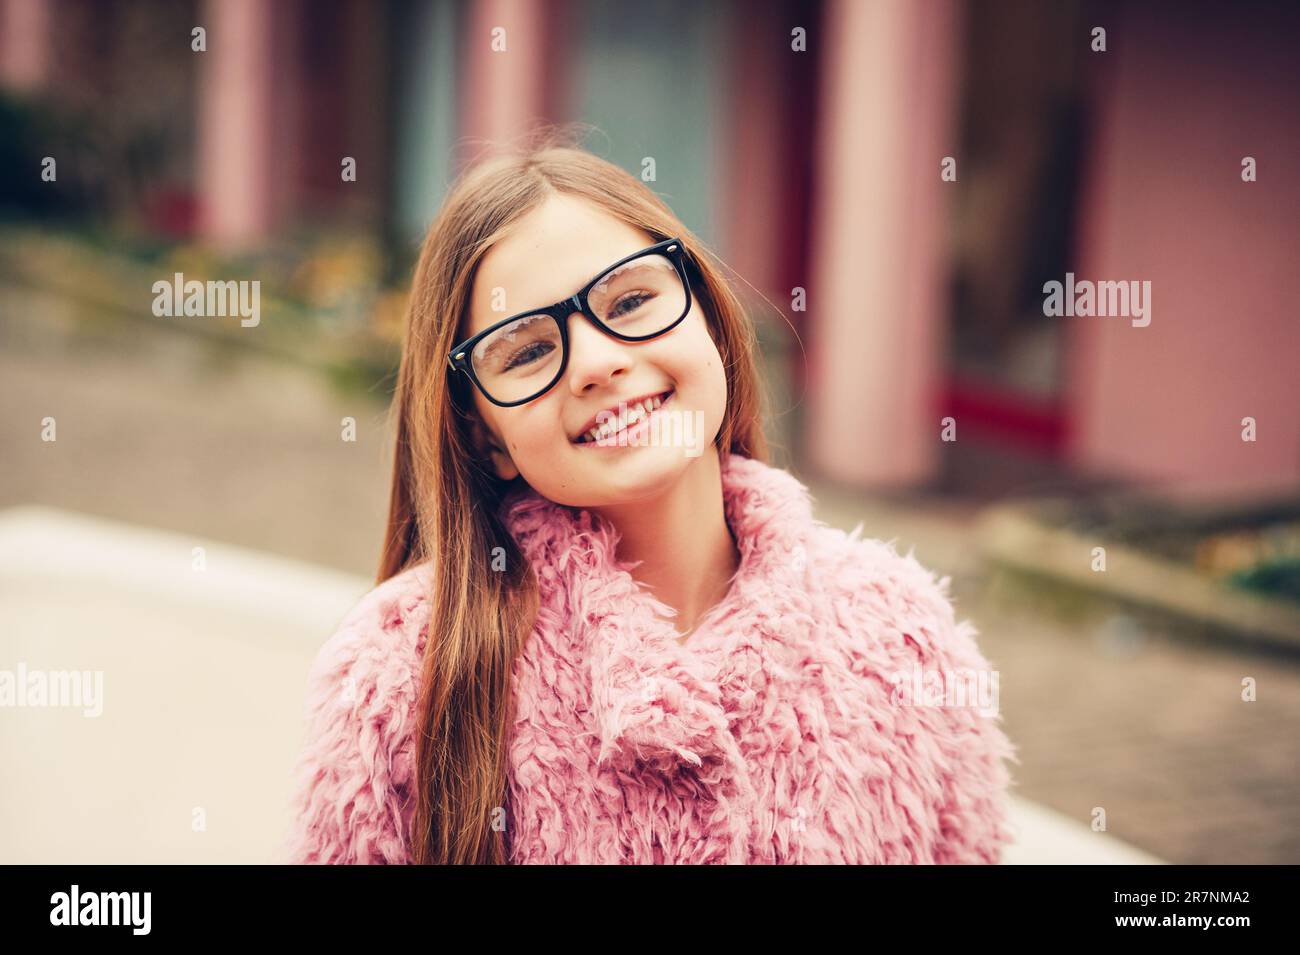 Outdoor portrait of cute young kid girl wearing eyeglasses and pink coat Stock Photo